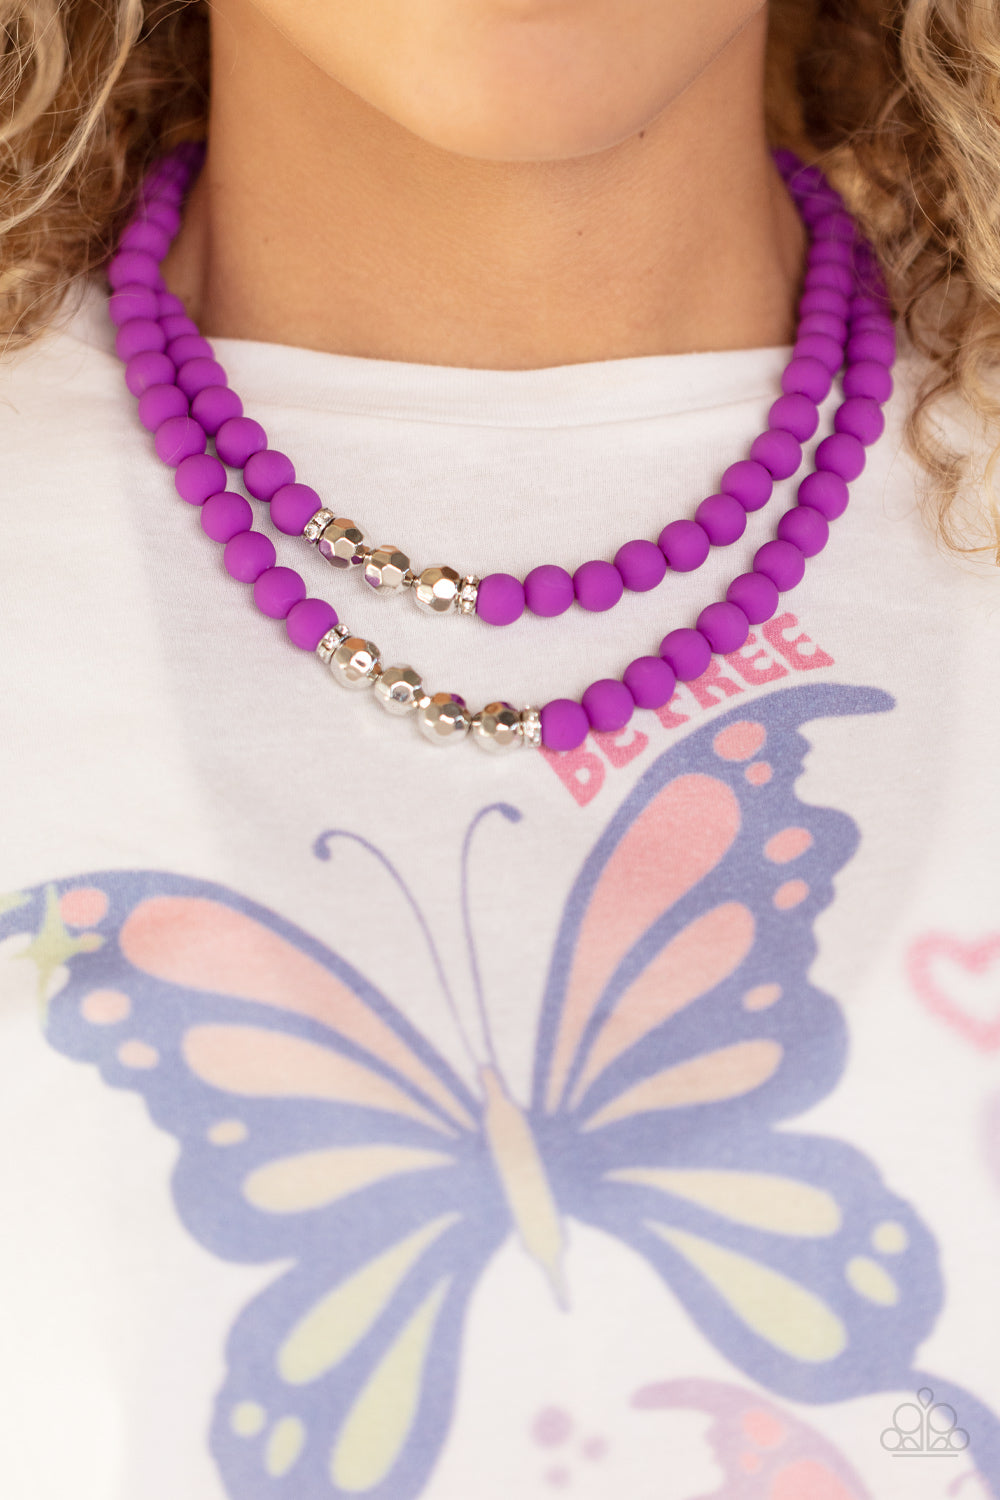 Paparazzi Accessories Summer Splash - Purple Threaded along invisible wires, matte-finished Dahlia beads give way to center sections of white rhinestone encrusted rings and faceted silver beads. The vivacious display layers below the collar, creating a su